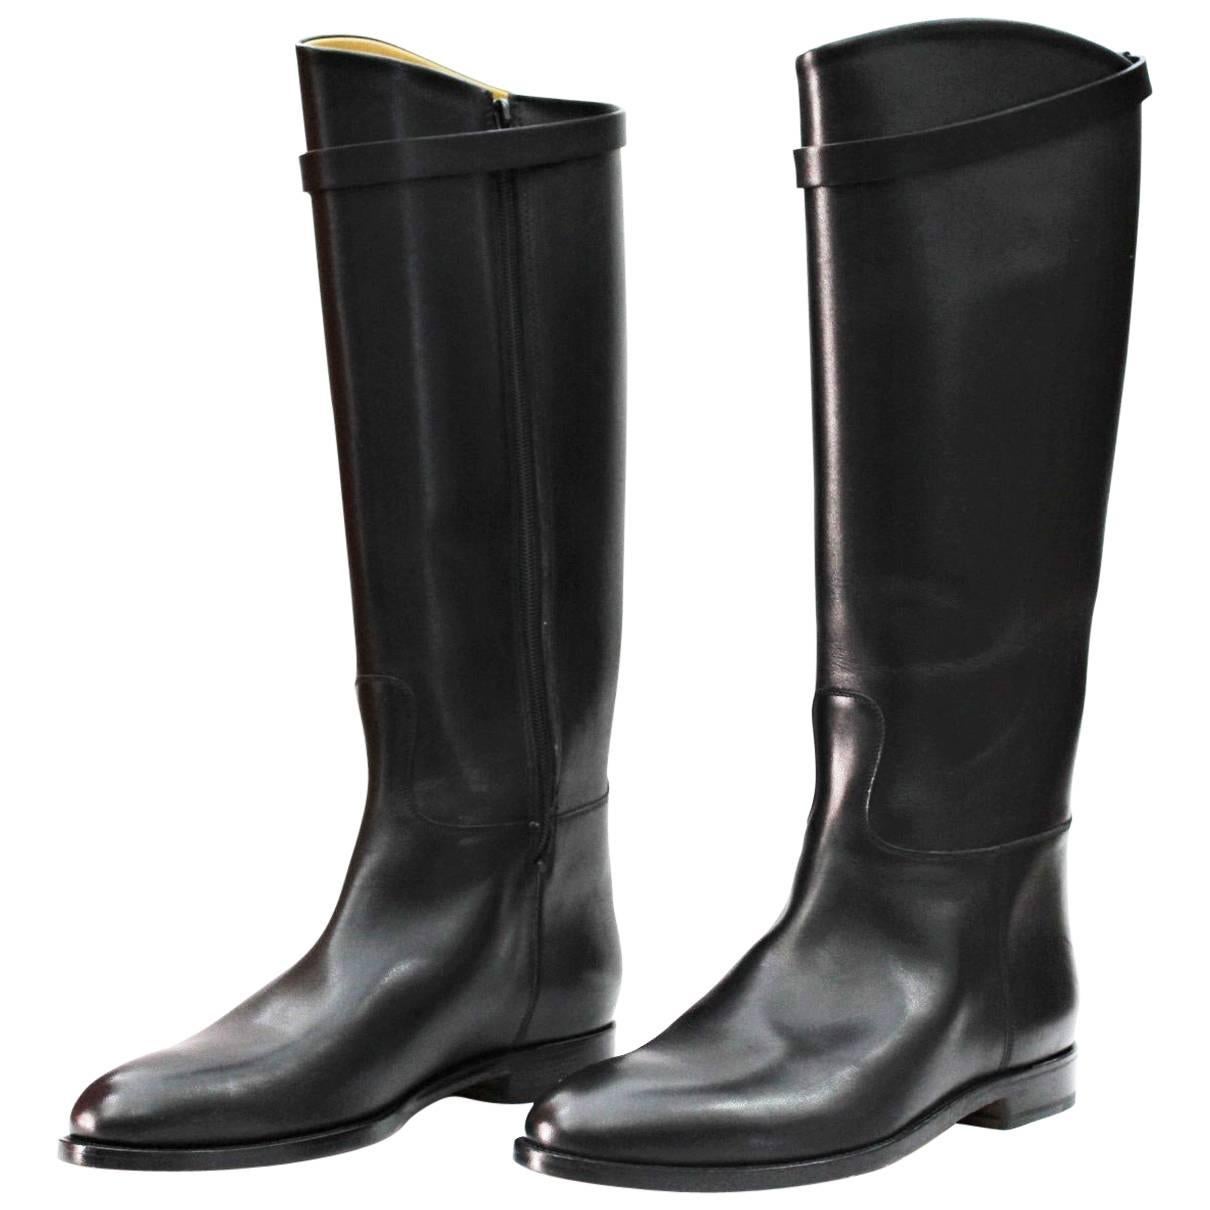 Hermes Riding Boots - 4 For Sale on 1stDibs | hermes horse riding boots,  designer riding boots, hermes horse boots